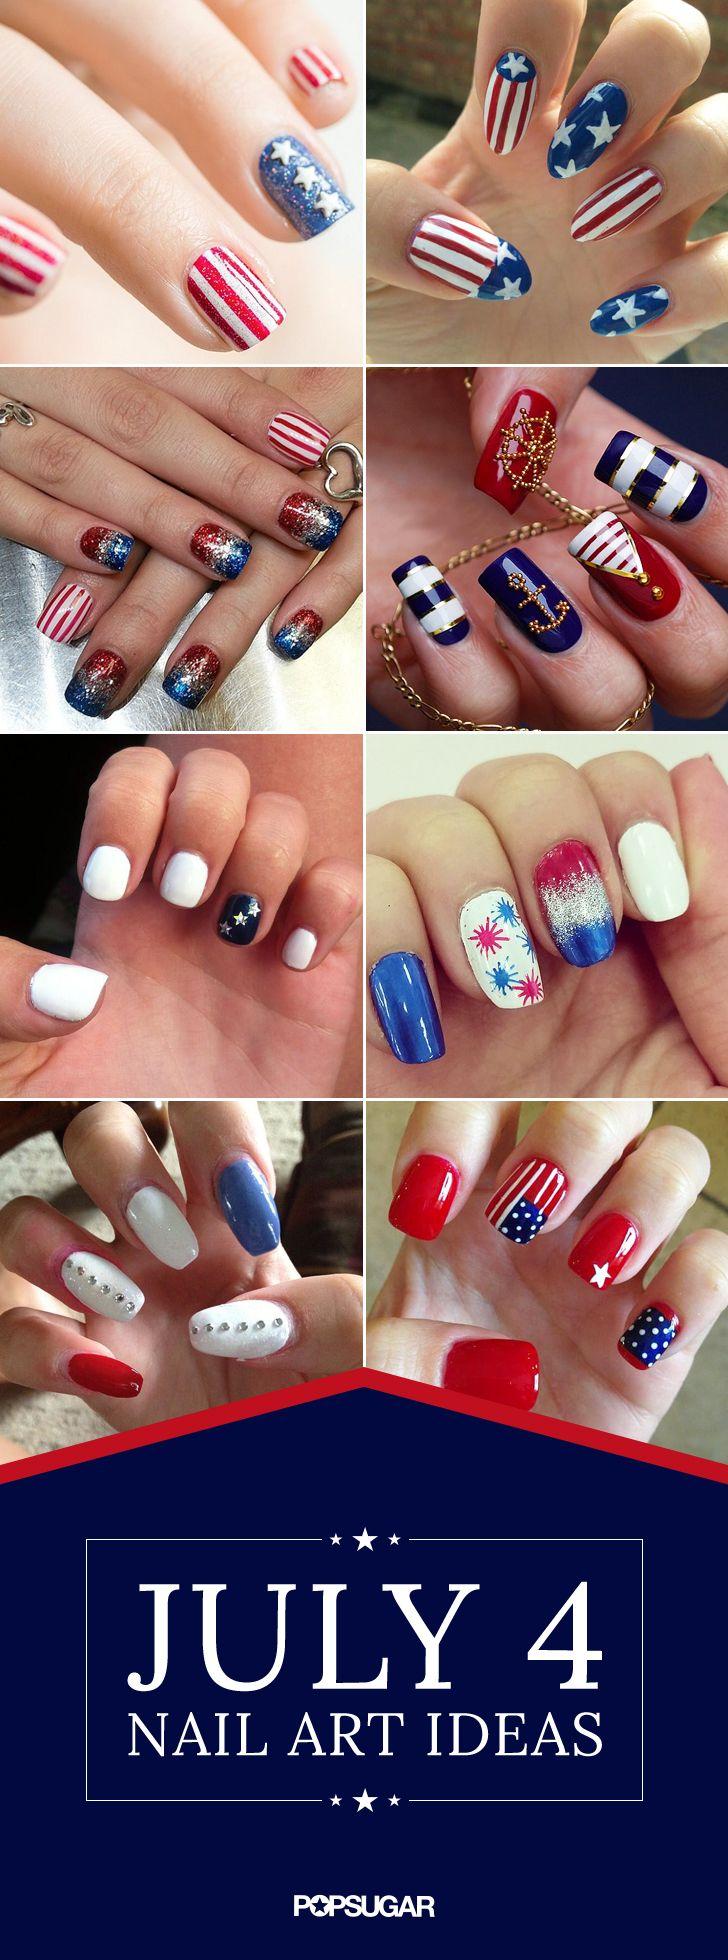 Hochzeit - Even More Inspiration For Your July 4 Nail Art